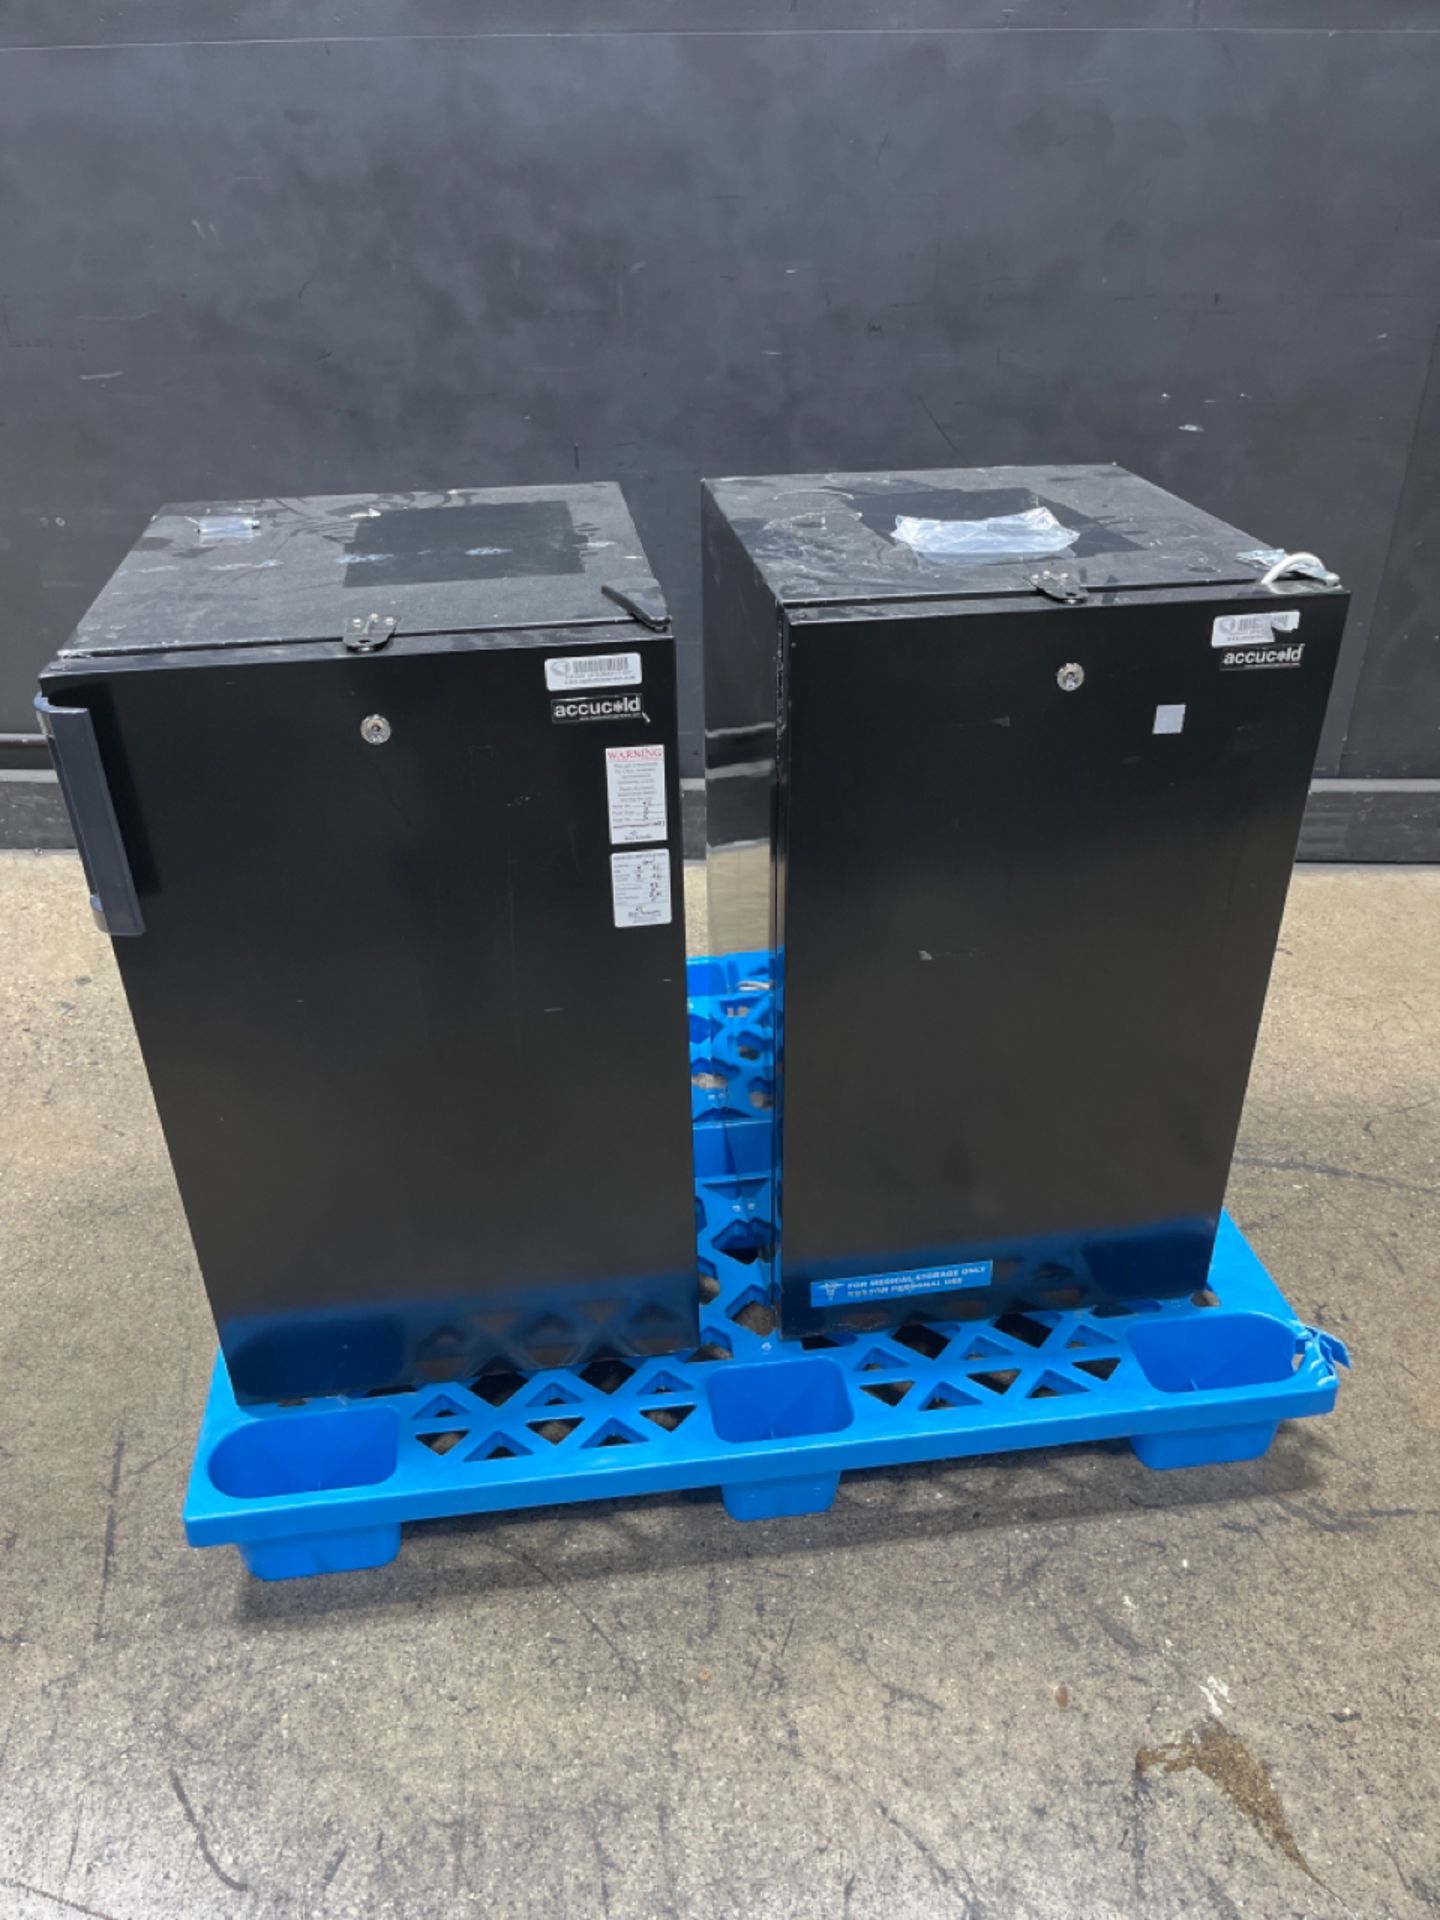 LOT OF ACCUCOLD MINI FRIDGES (LOCATED AT 3325 MOUNT PROSPECT ROAD, FRANKLIN PARK, IL, 60131)